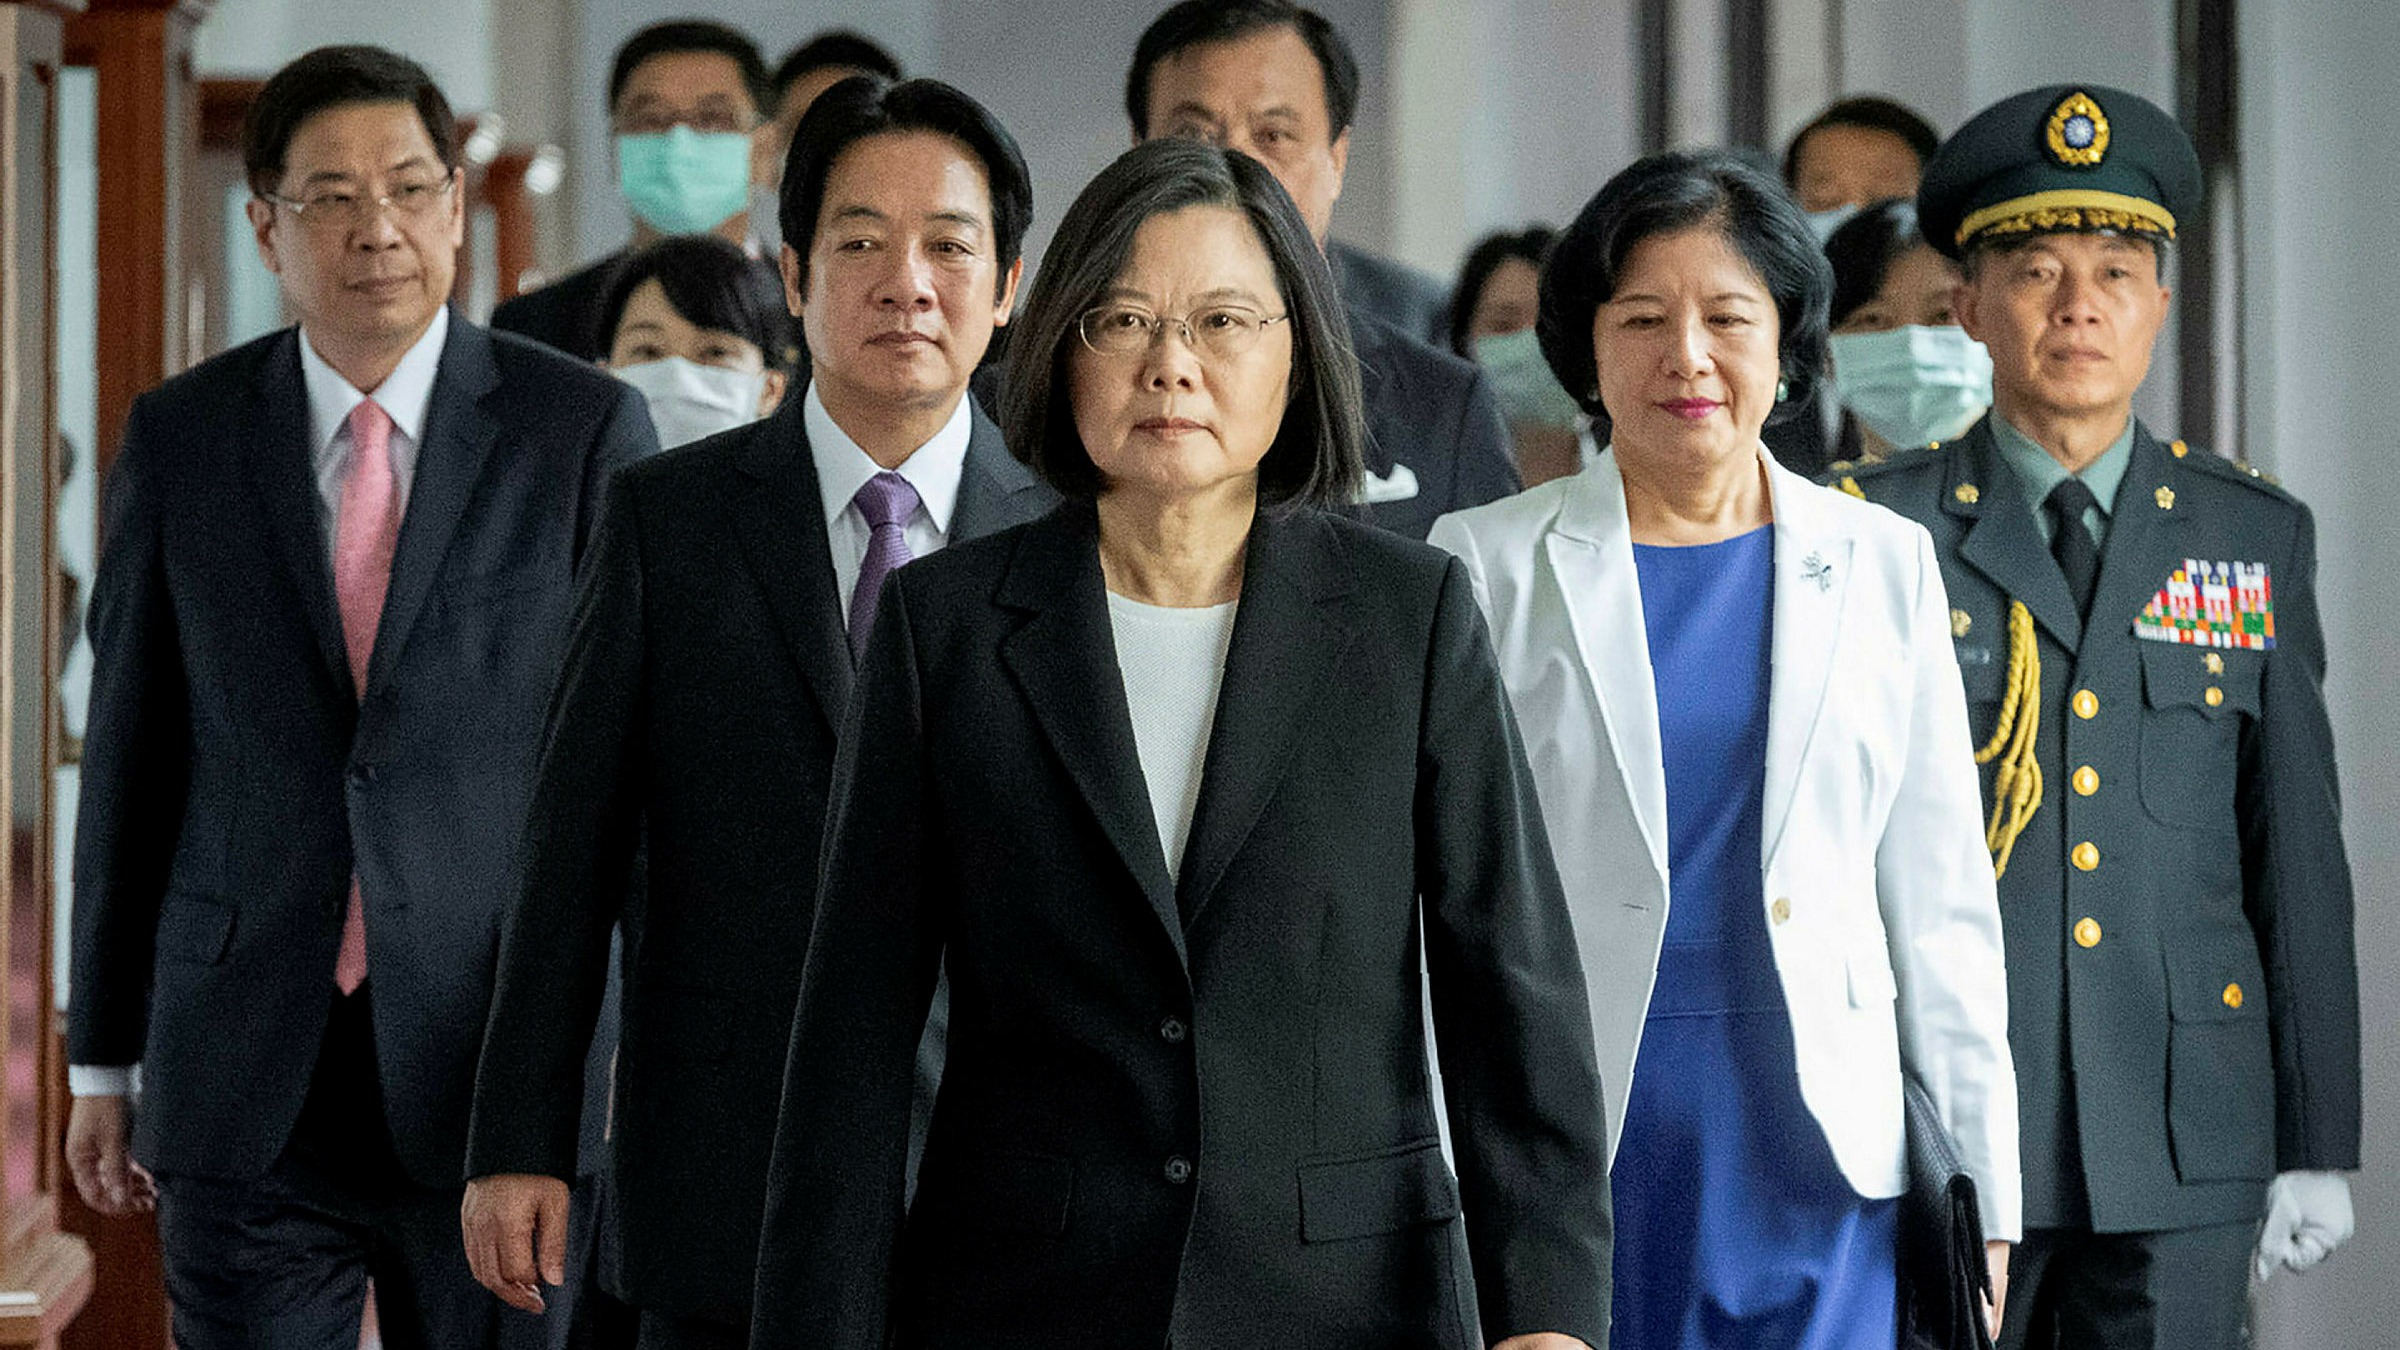 Taiwan president calls on Xi Jinping to stabilise cross-strait ties | Financial Times